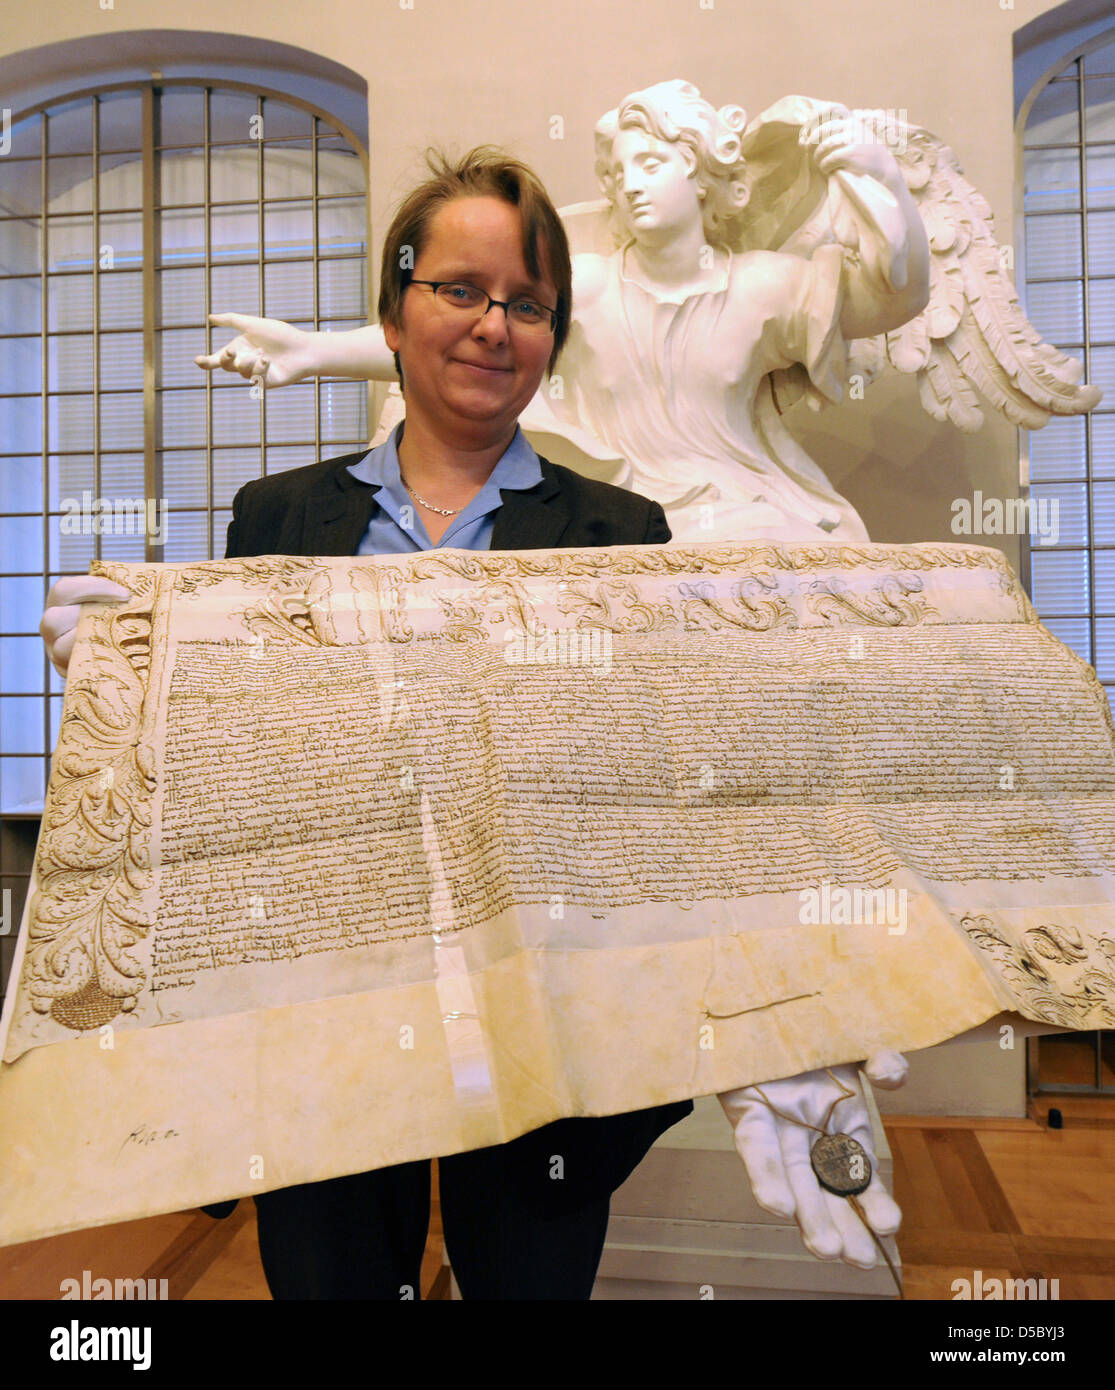 Birgit Mitzscherlich, archive director of Dresden-Meissen diocese, presents a papal bull dated 21 January 1676 at the cathedral foundation (Domstift) in Bautzen, Germany, 20 January 2010. The bull had been discovered during refurbishment works. Photo: MATTHIAS HIEKEL Stock Photo